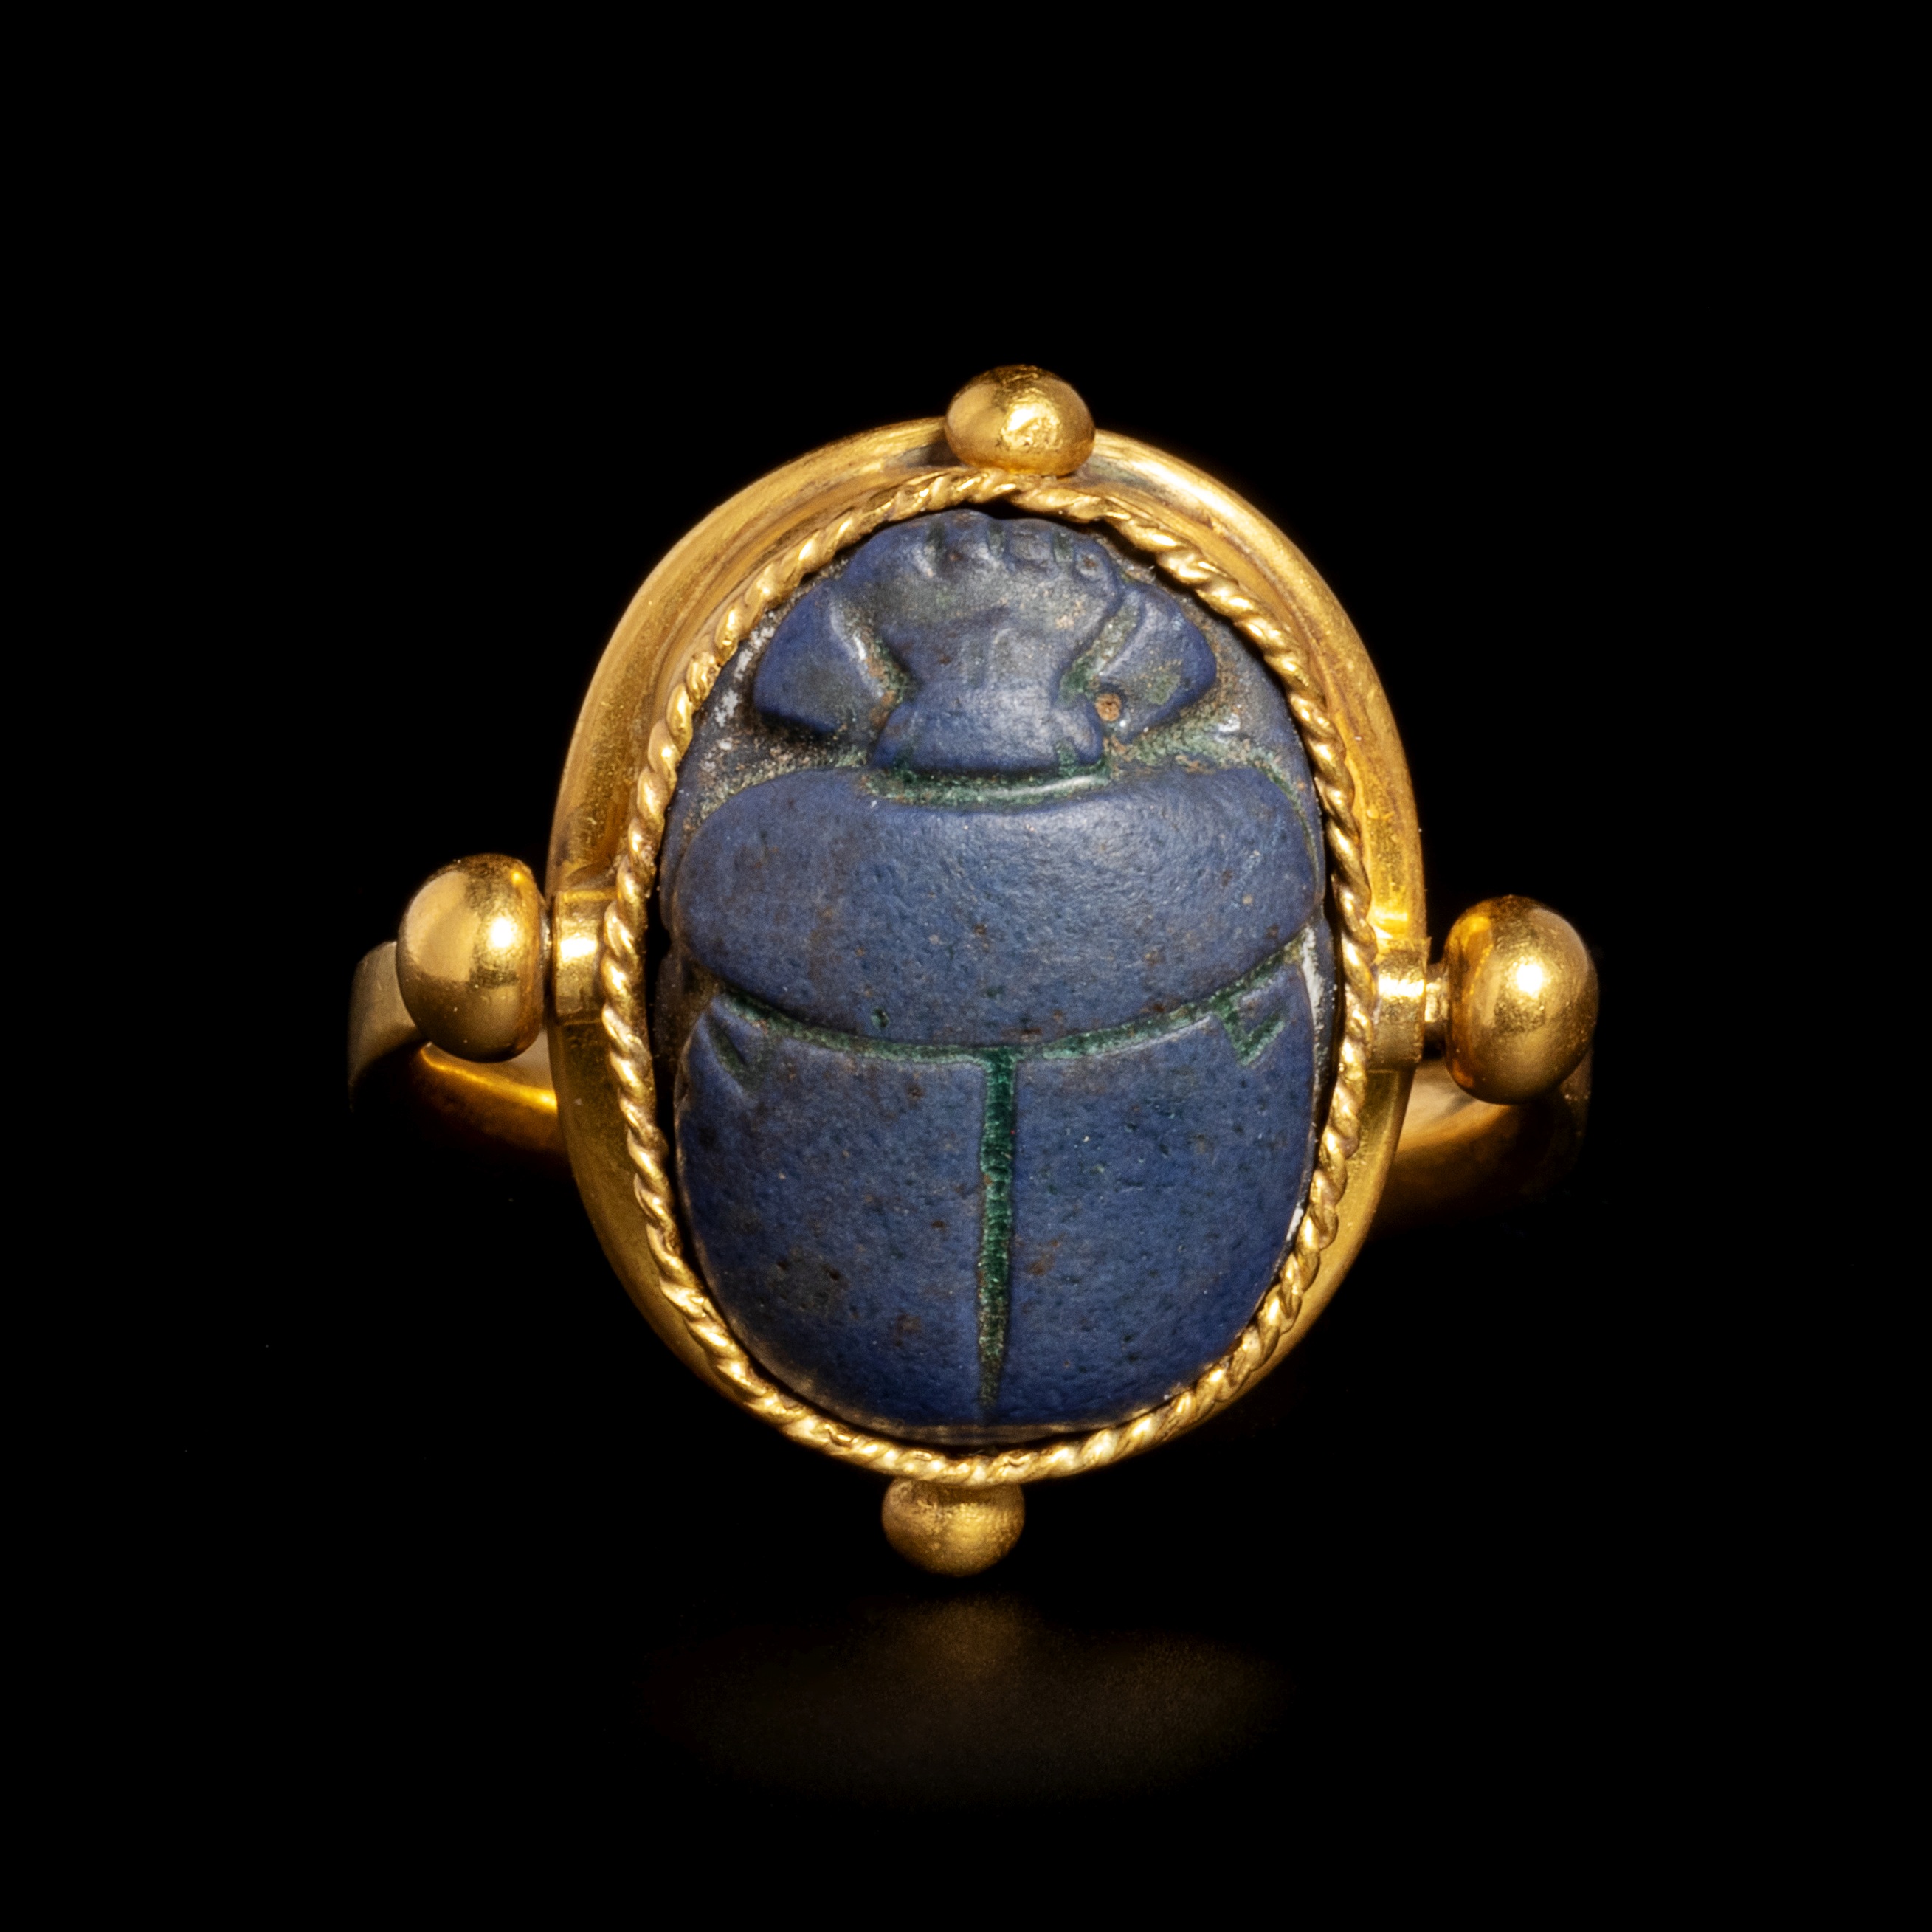 An Egyptian Faience Scarab Swivel Ring Ring size 7 1/2; Length of scarab 1/2 inch (1.25 cm). - Image 2 of 4